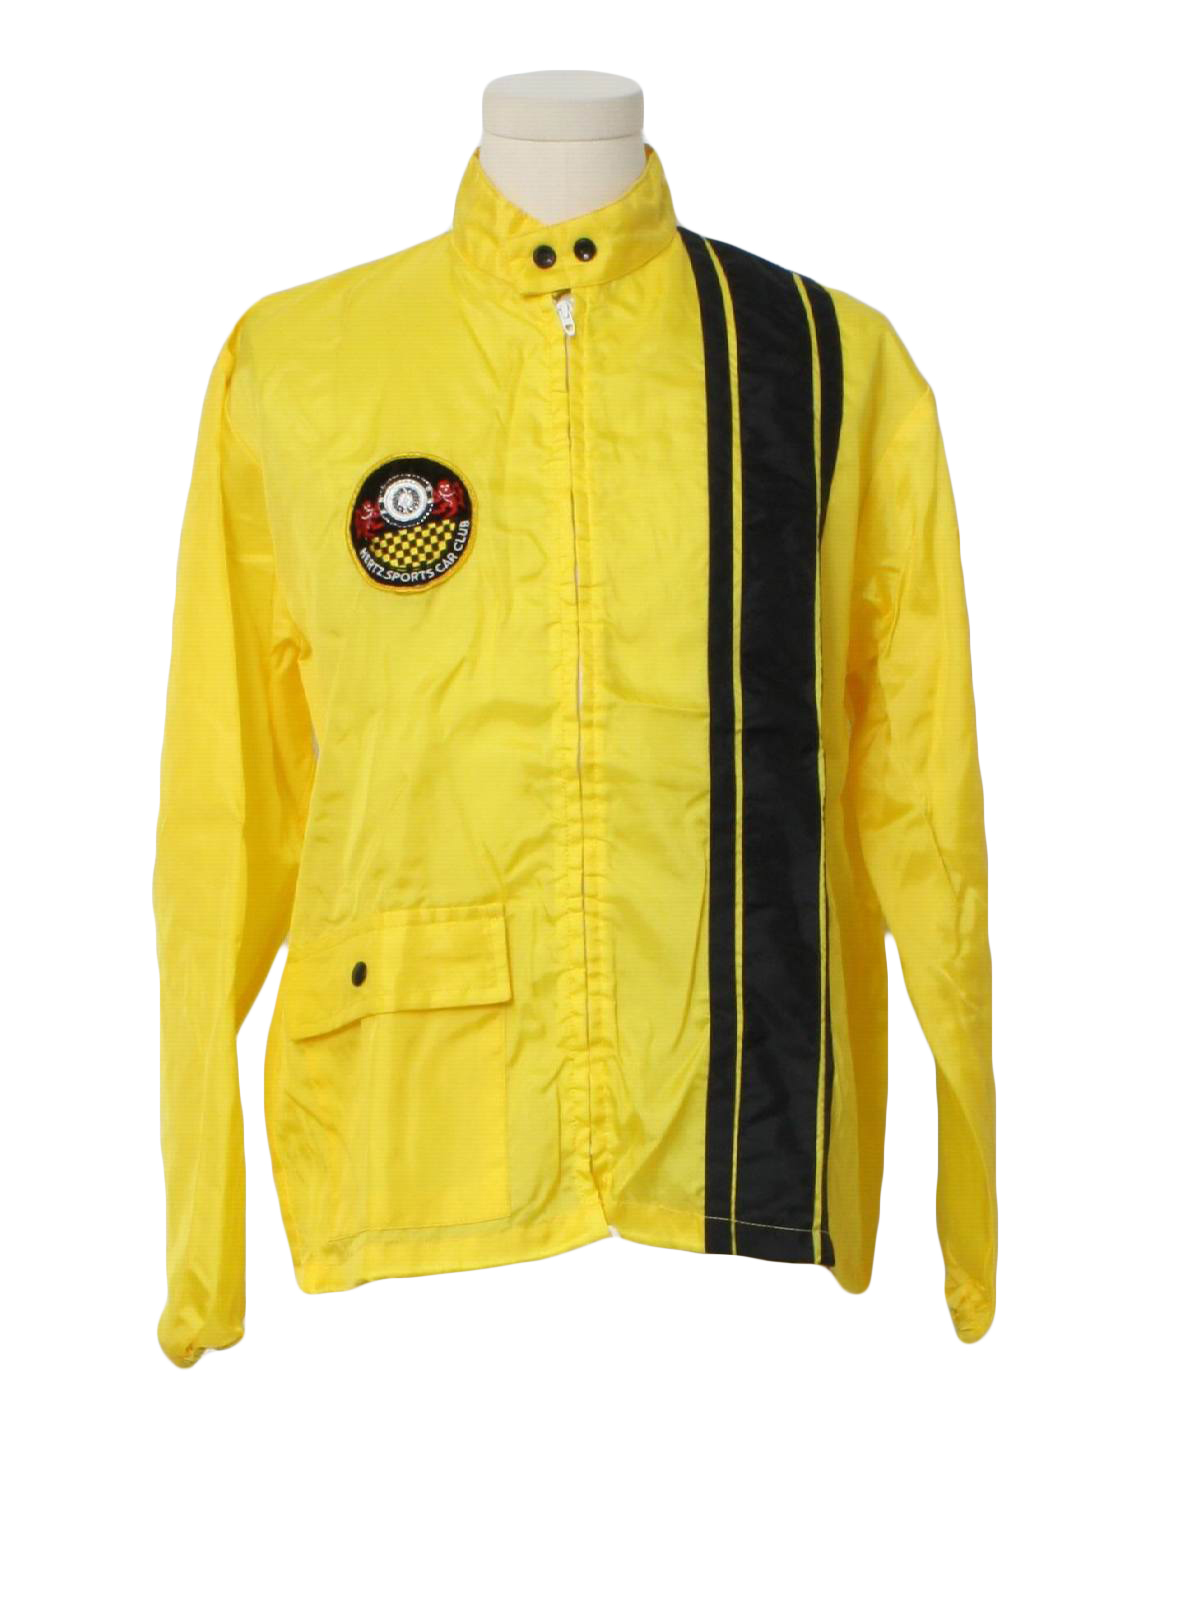 Retro 80's Jacket: 80s -no label- Mens sunny yellow background and